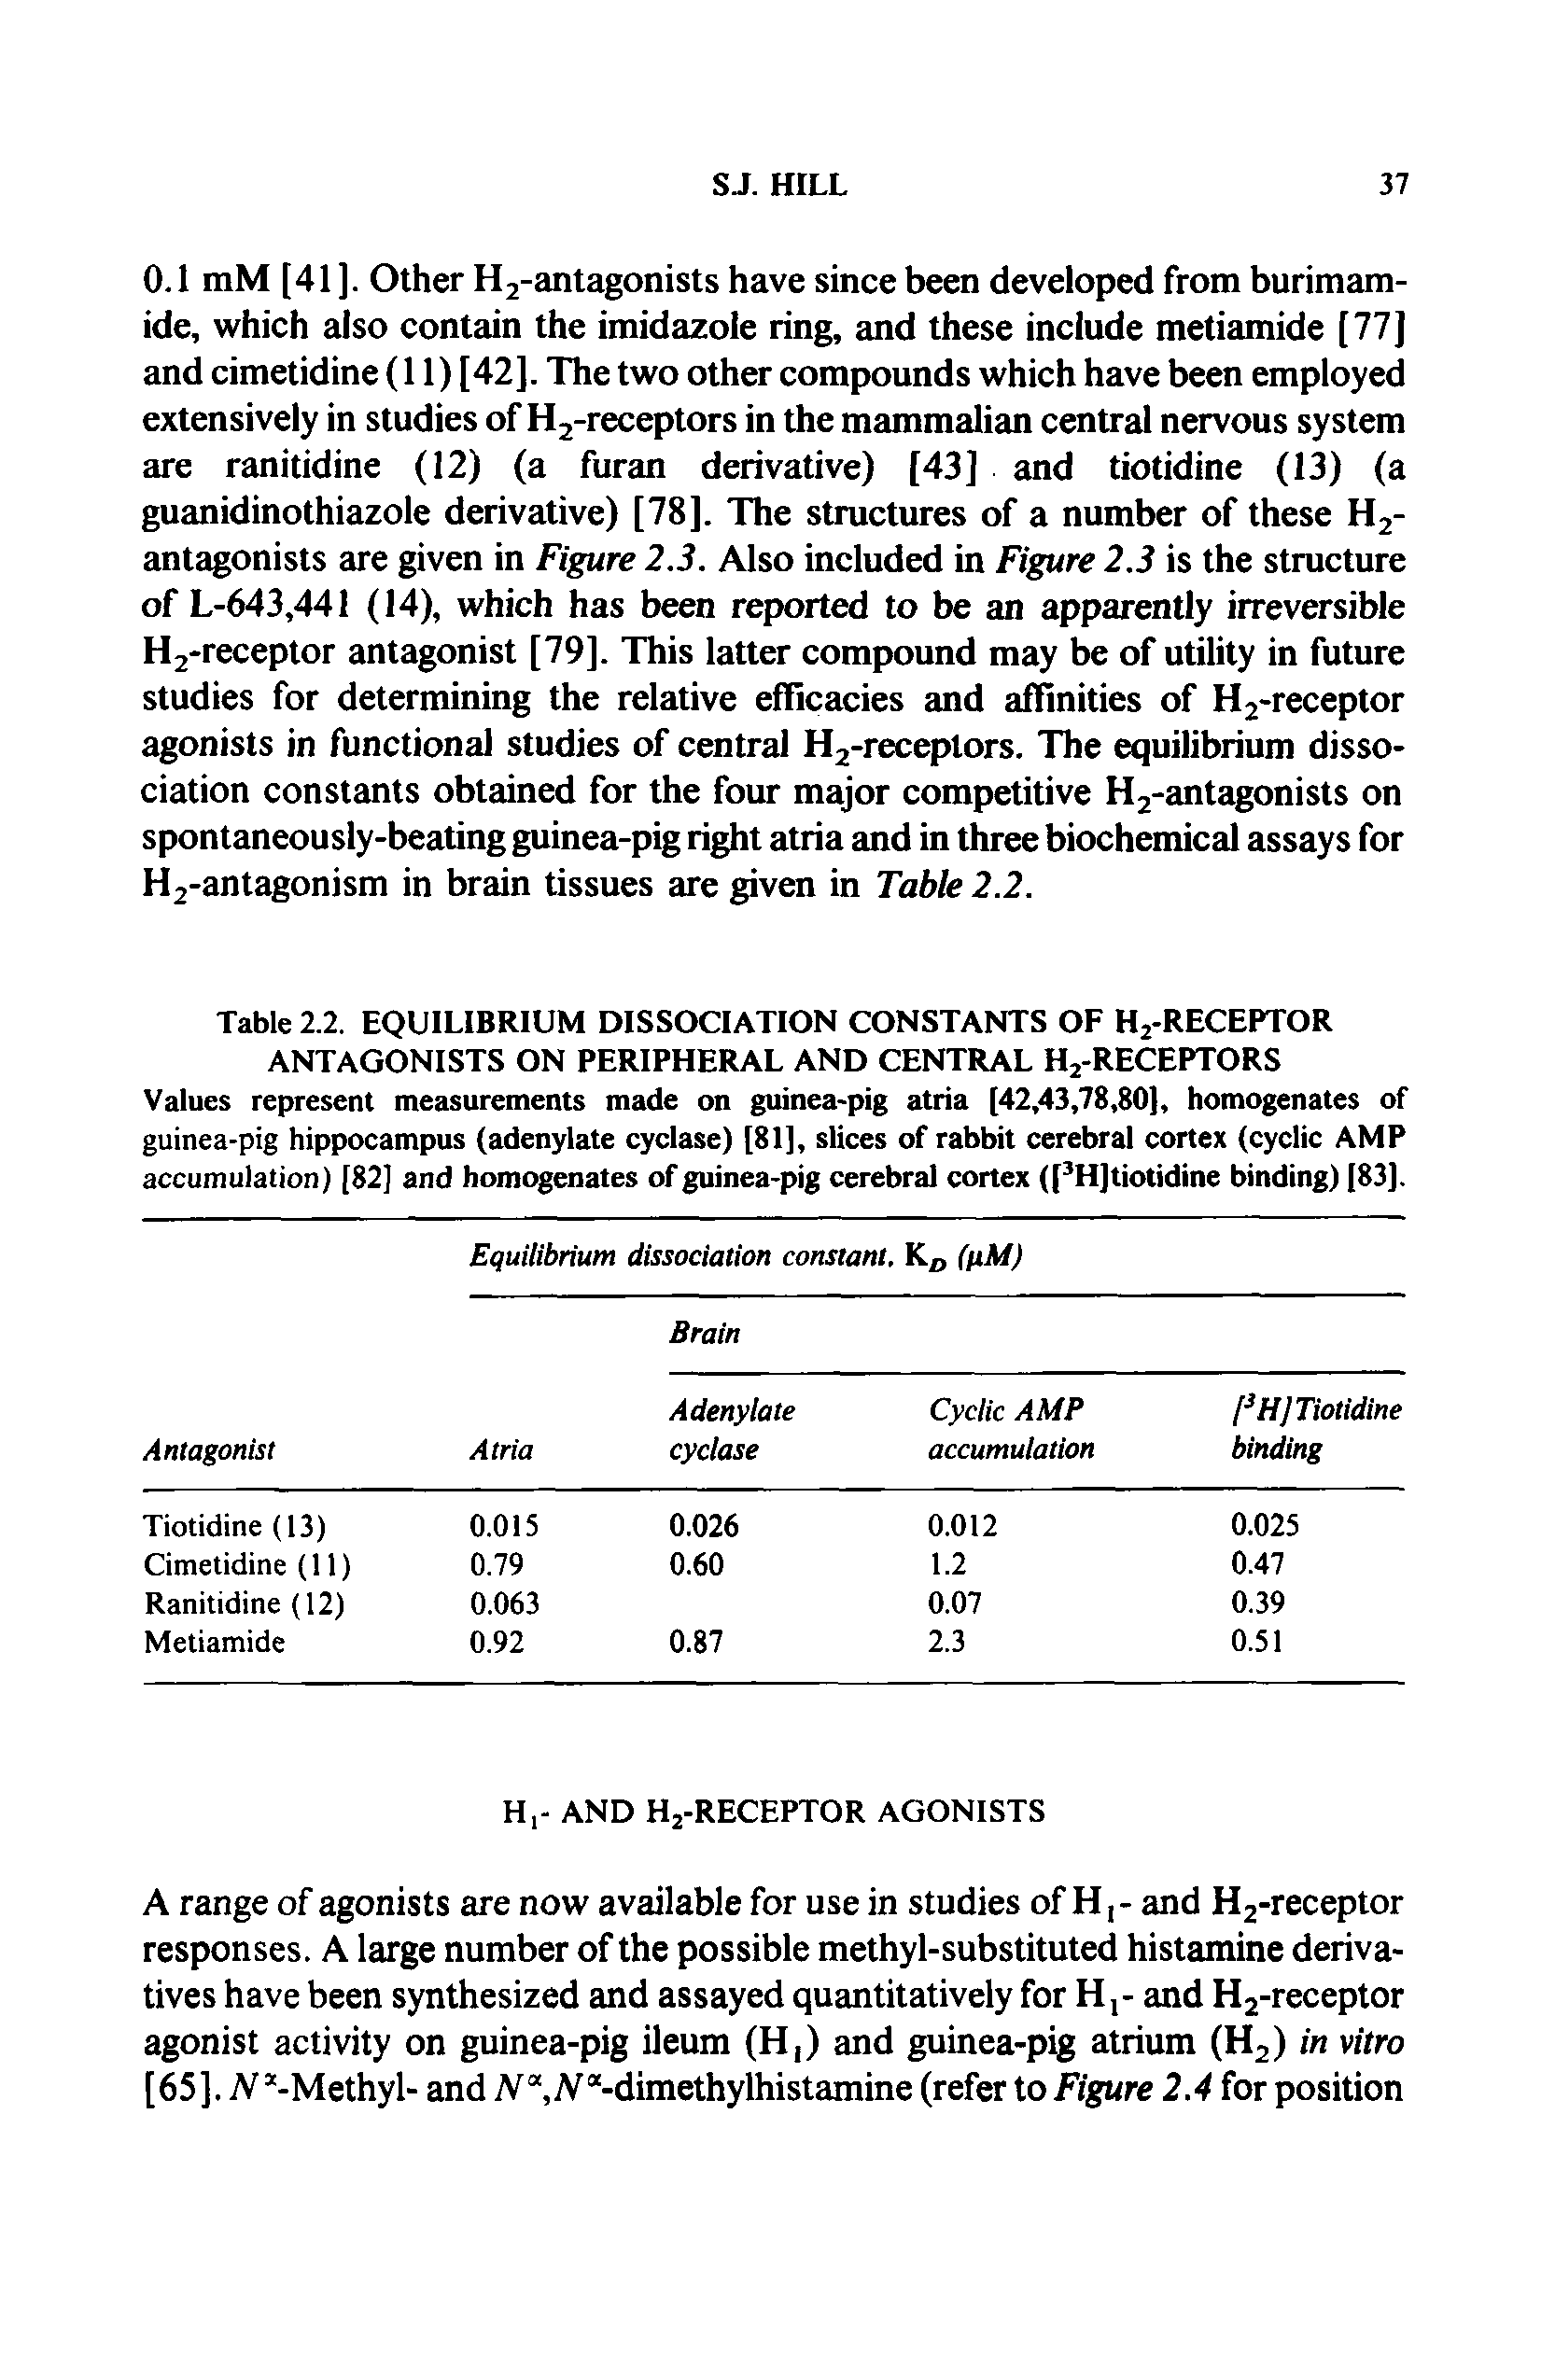 Table 2.2. EQUILIBRIUM DISSOCIATION CONSTANTS OF HrRECEPTOR ANTAGONISTS ON PERIPHERAL AND CENTRAL H2-RECEPTORS Values represent measurements made on guinea-pig atria [42,43,78,80], homogenates of guinea-pig hippocampus (adenylate cyclase) [81], slices of rabbit cerebral cortex (cyclic AMP accumulation) [82] and homogenates of guinea-pig cerebral cortex ([3H]tiotidine binding) [83].